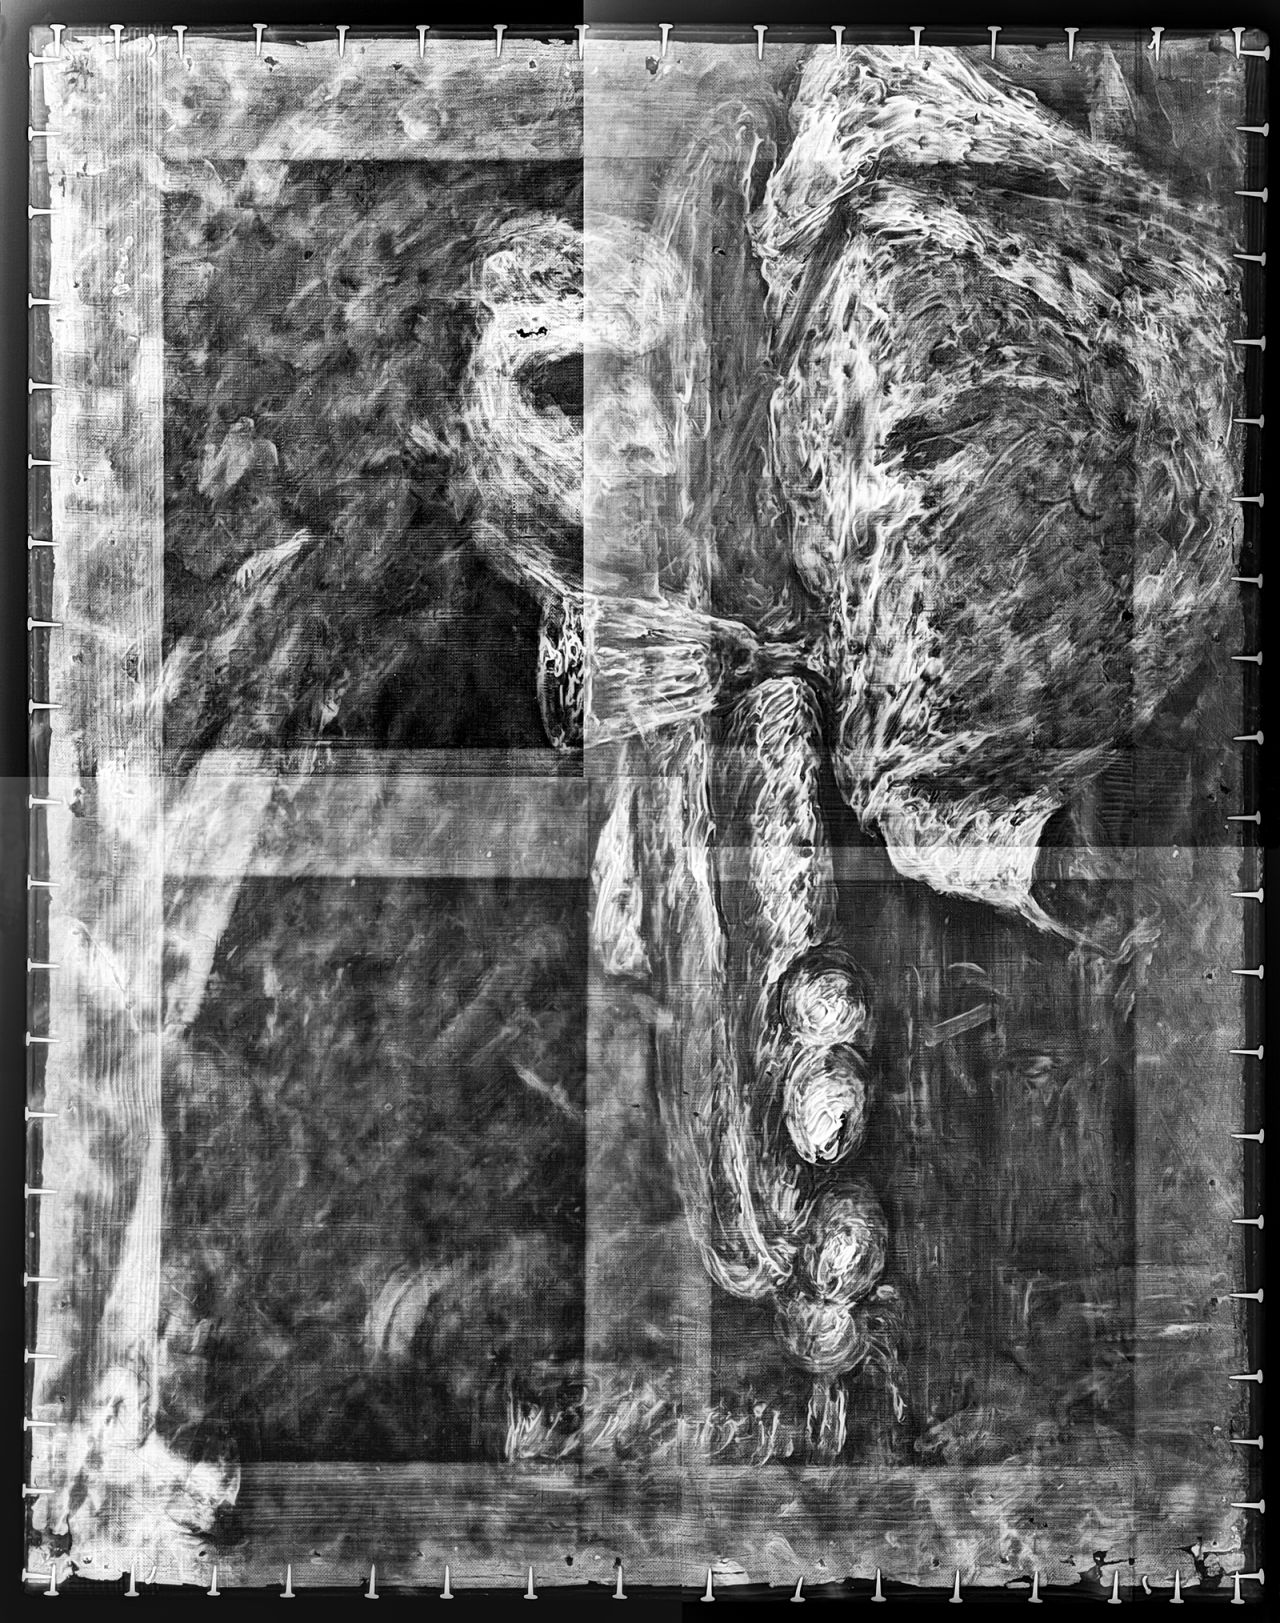 The X-ray image, shown here in full, reveals the presence of white lead, which was used as a pigment.